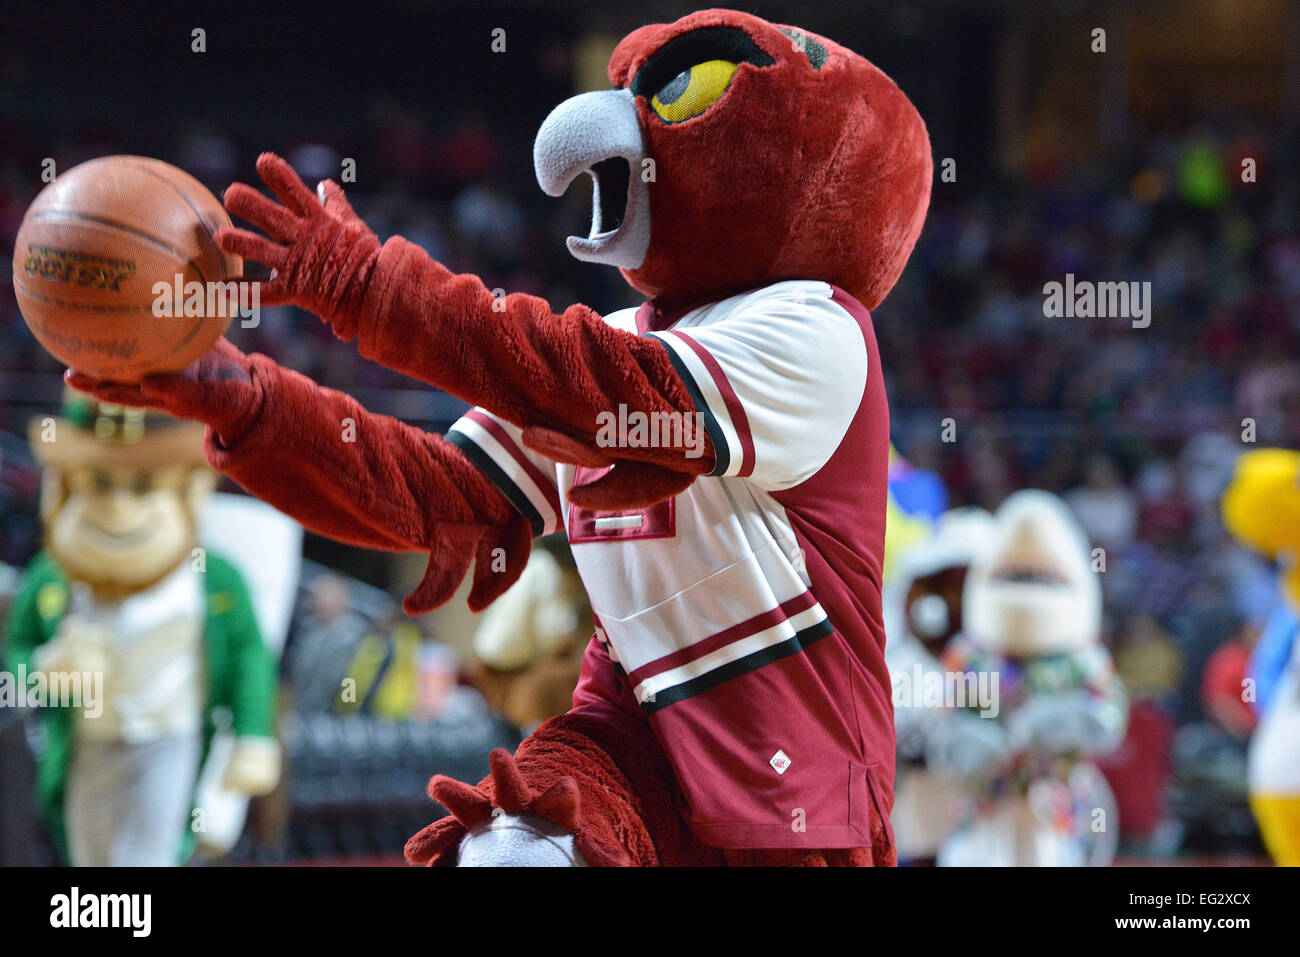 Philadelphia, PA, US. 14th Feb, 2015. A ''throw back'' Temple Owl mascot goes up for a shot in a mascot basketball game during the basketball game between the ECU Pirates and Temple Owls played at the Liacouras Center in Philadelphia, PA. Temple beat ECU 66-53. Credit:  Ken Inness/ZUMA Wire/Alamy Live News Stock Photo